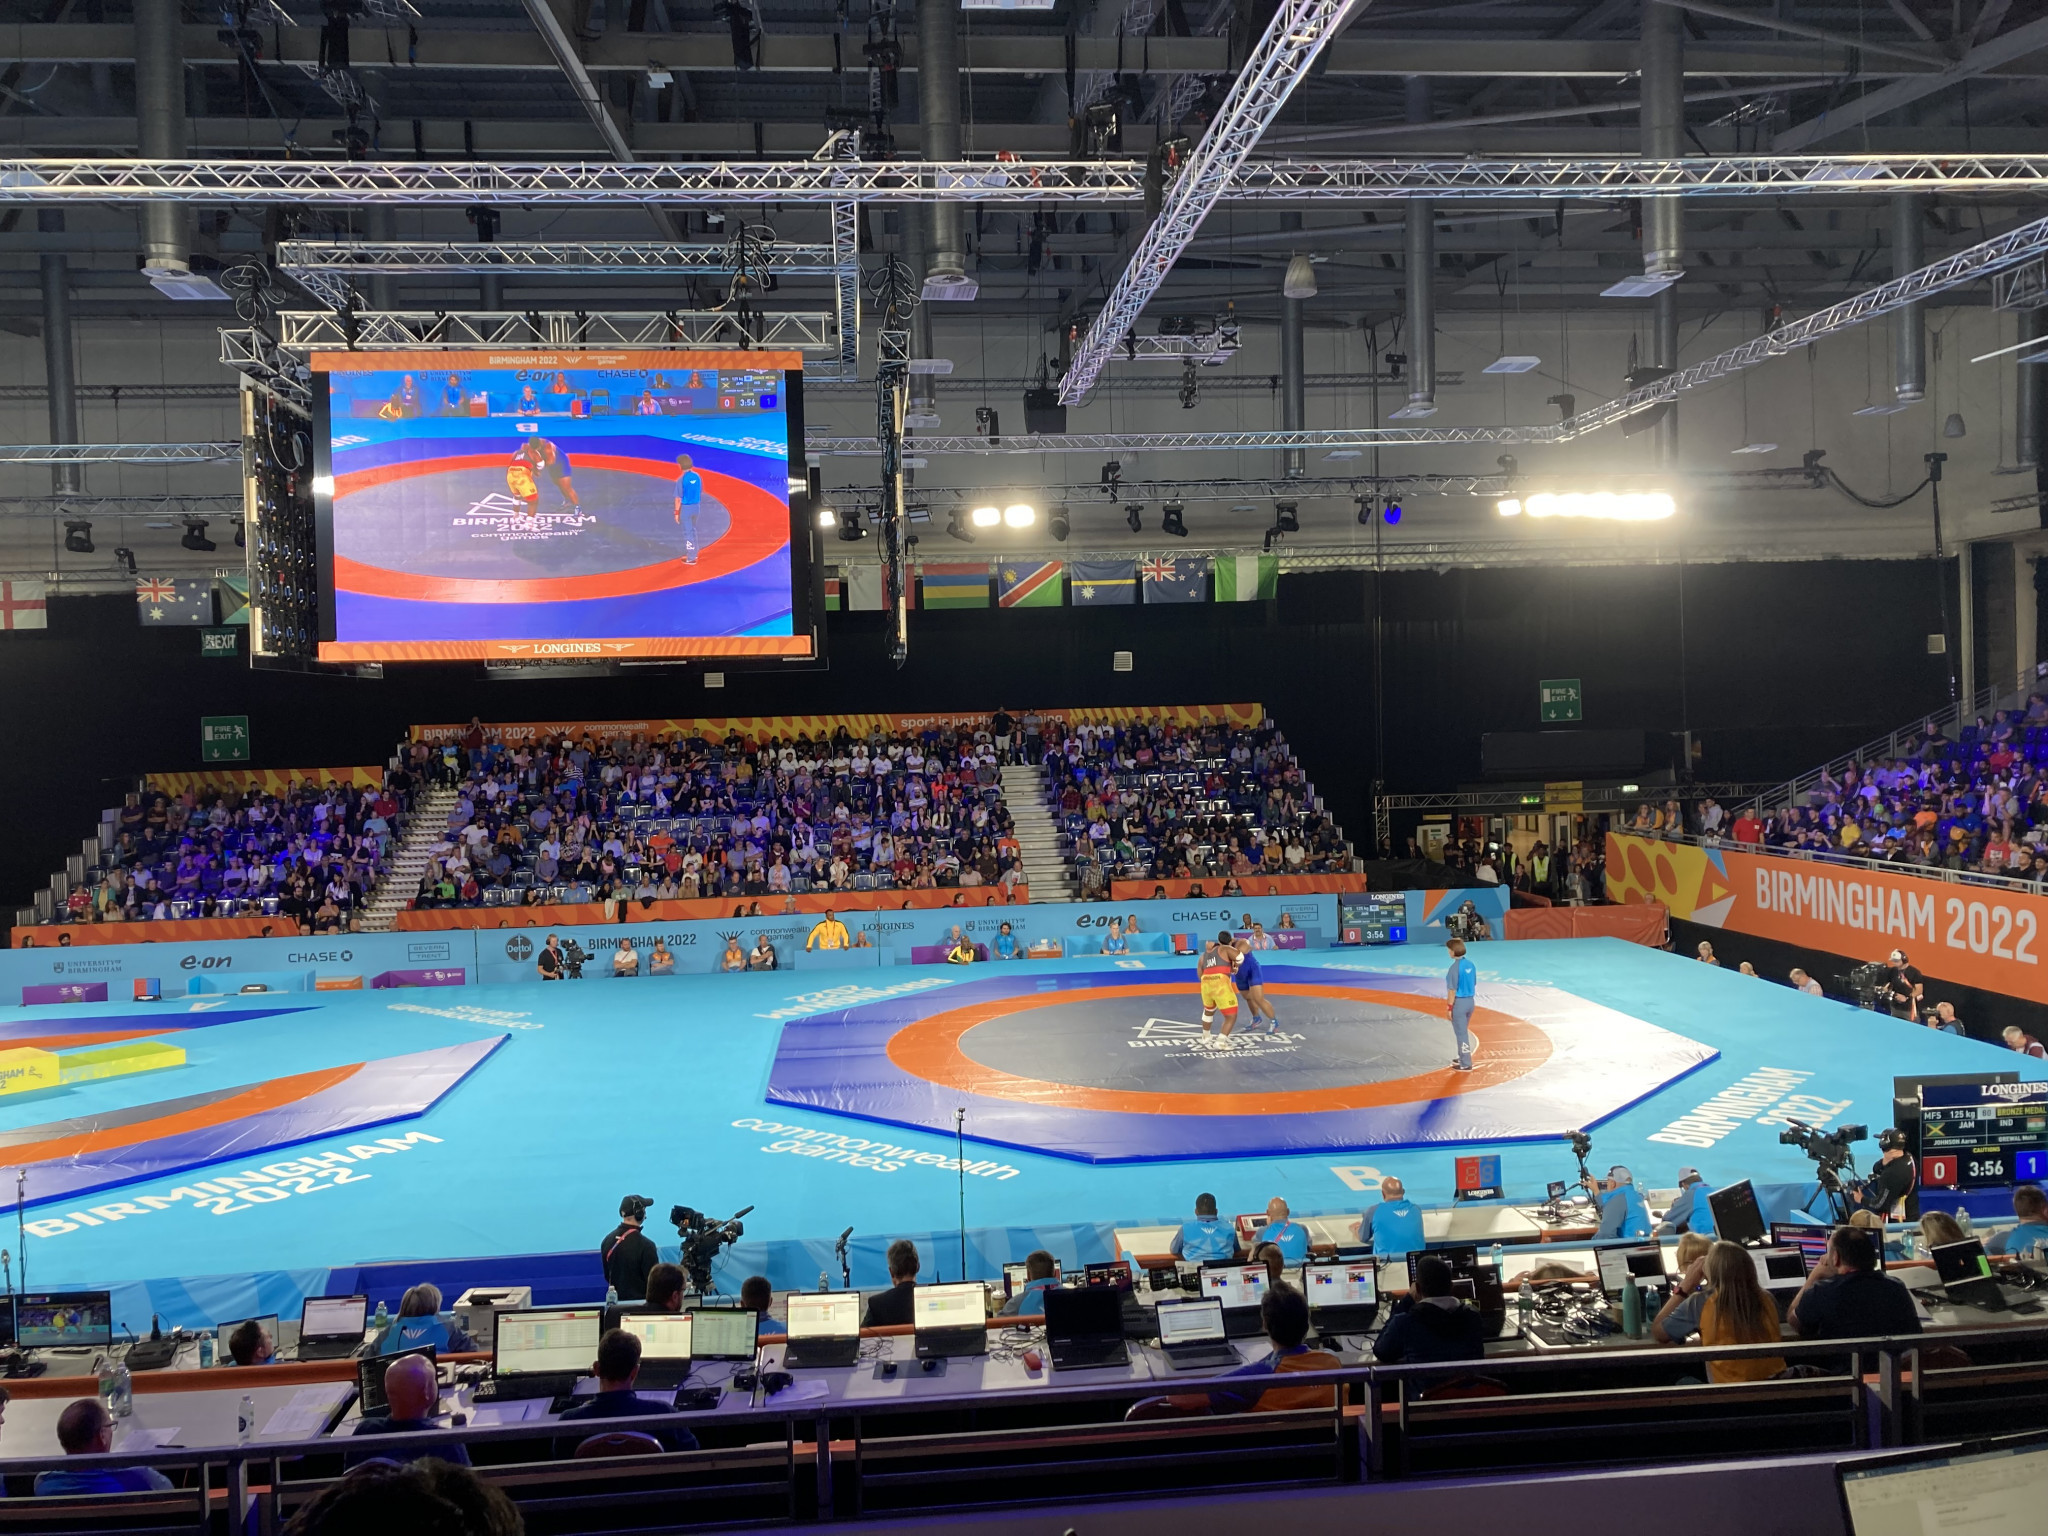 Wrestling session hit by delay over "safety issues" at Birmingham 2022